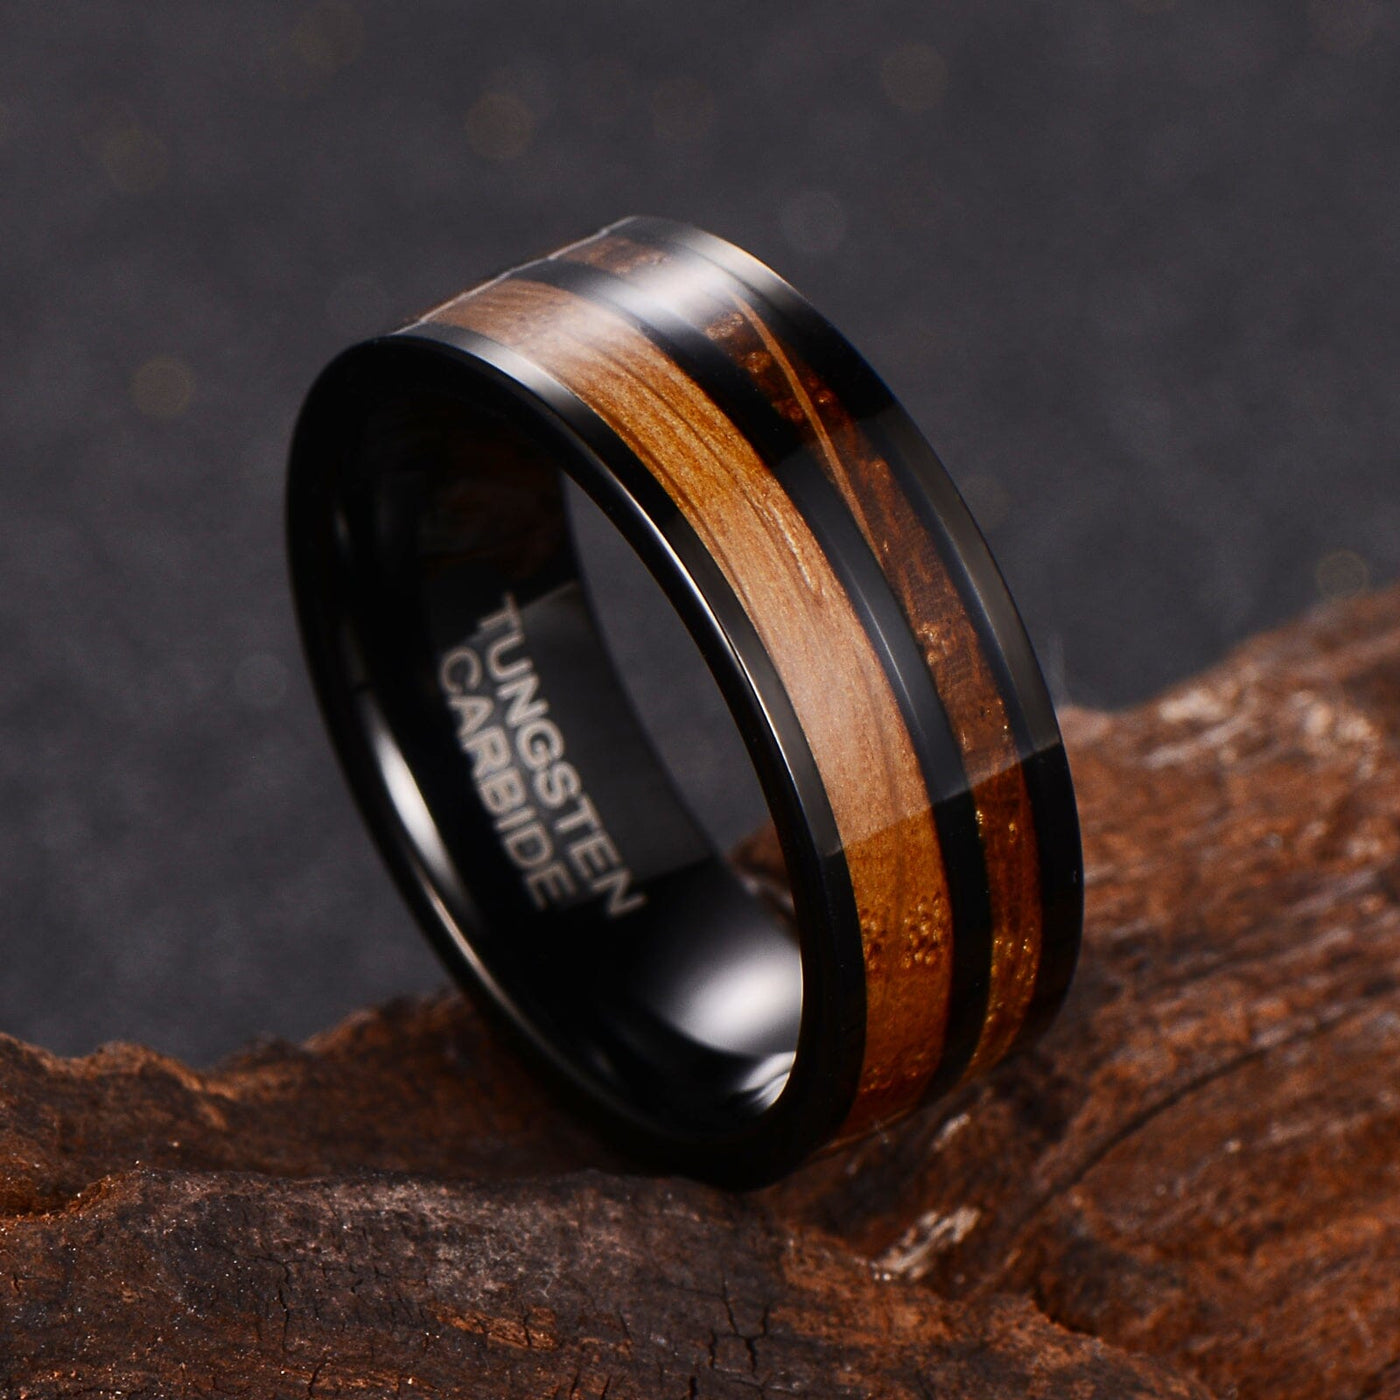 Men's Whisky Wood Black Tungsten Ring WR-219 - The Silver Goose SA